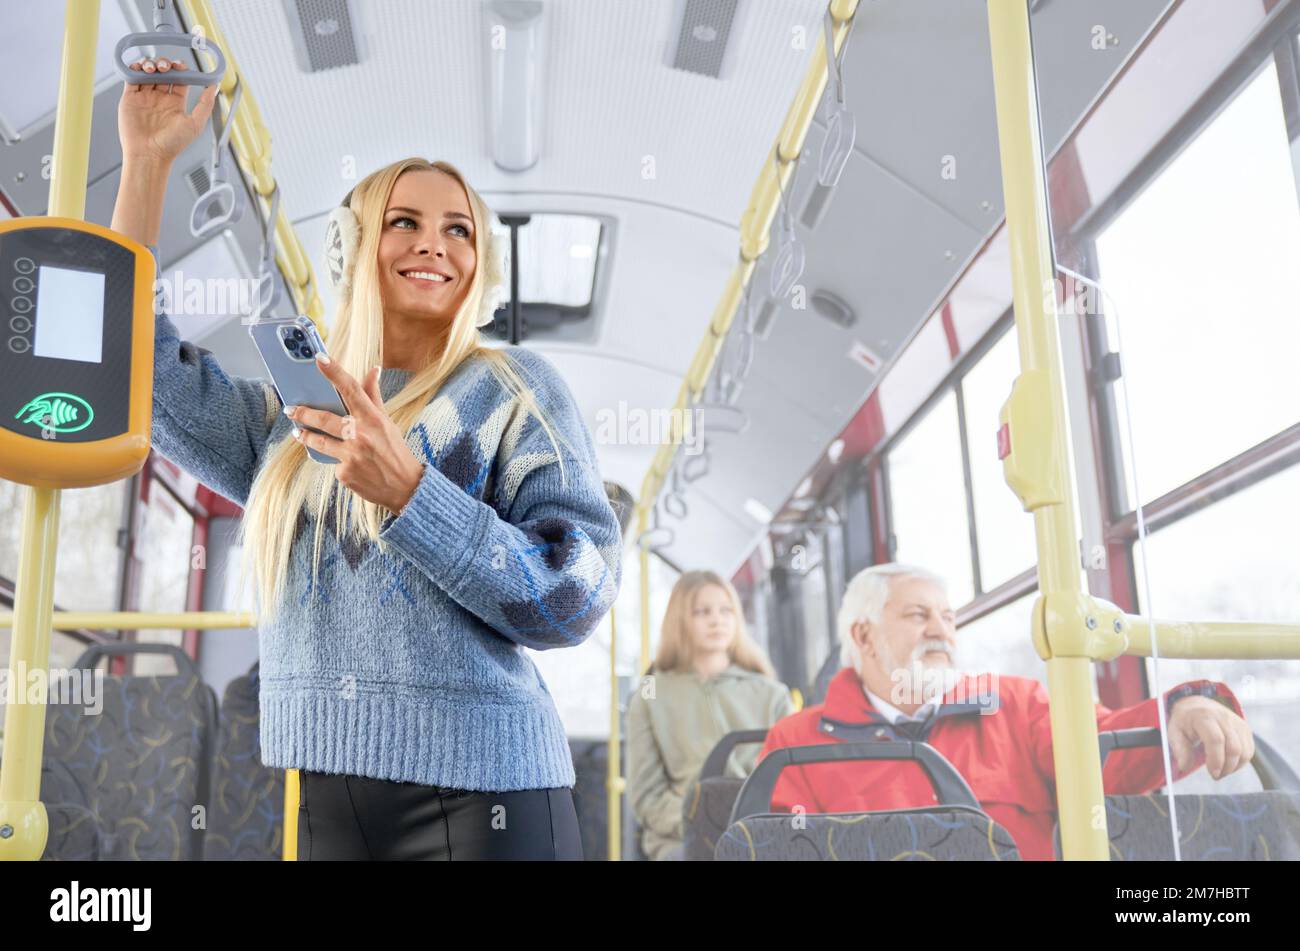 Portrait of pretty smiling woman standing in bus keeping holder and smartphone in her hands. Passengers of public transport looking through window outside. Concept of routine morning actions. Stock Photo